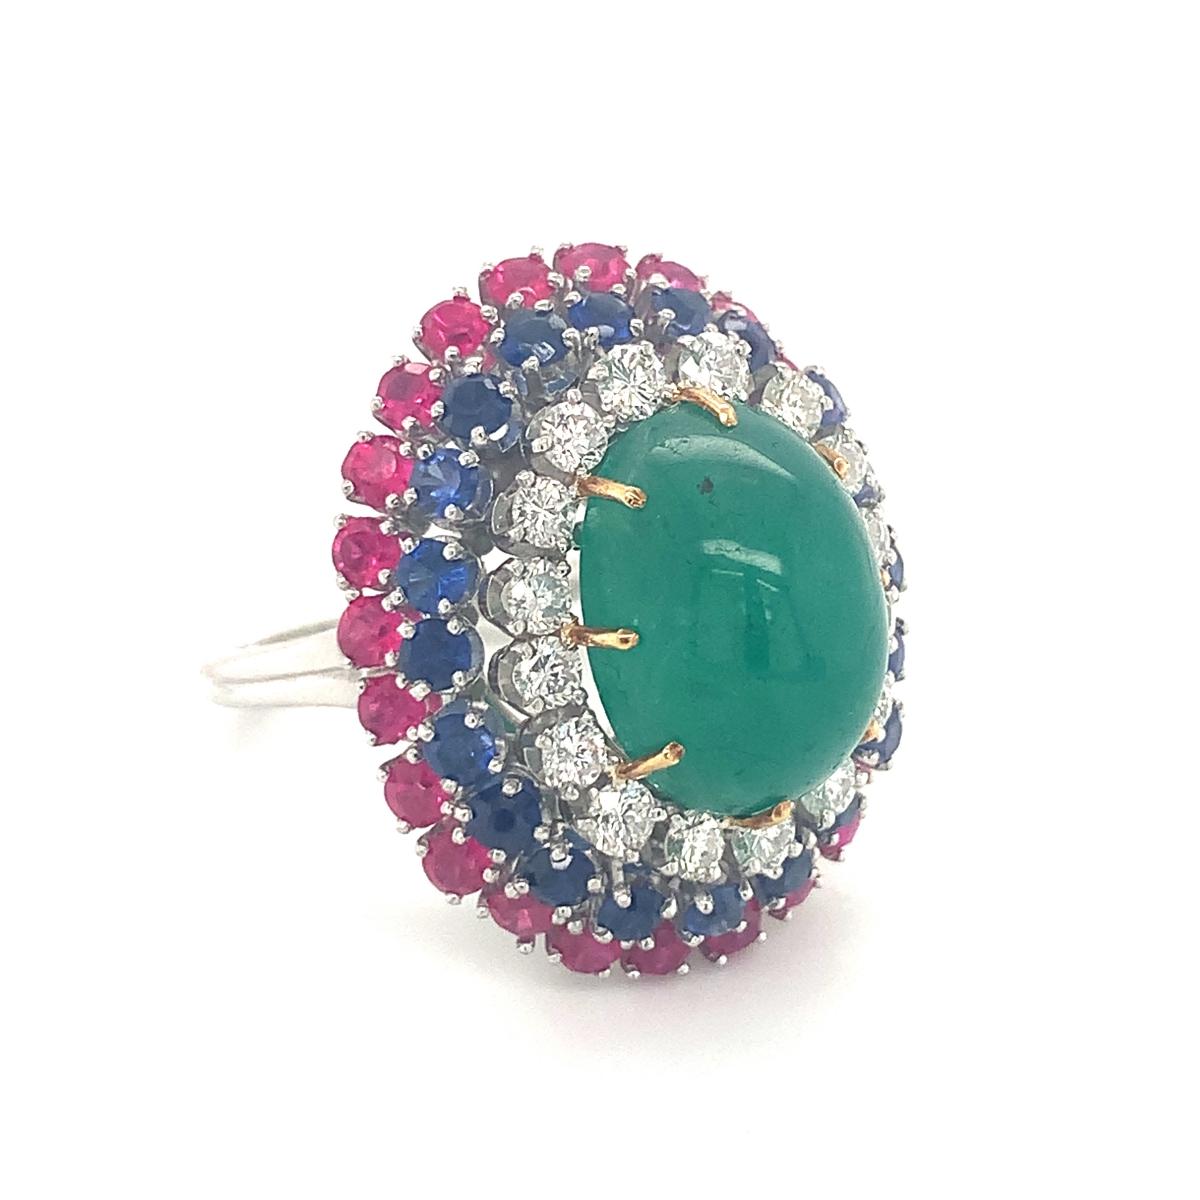 One multi-gemstone bombe form platinum and gold ring featuring one oval cabochon emerald weighing 11 ct., 20 round brilliant cut rubies totaling 2.22 ct. and 24 round brilliant cut sapphires totaling 2.64 ct. Enhanced by 16 round brilliant cut